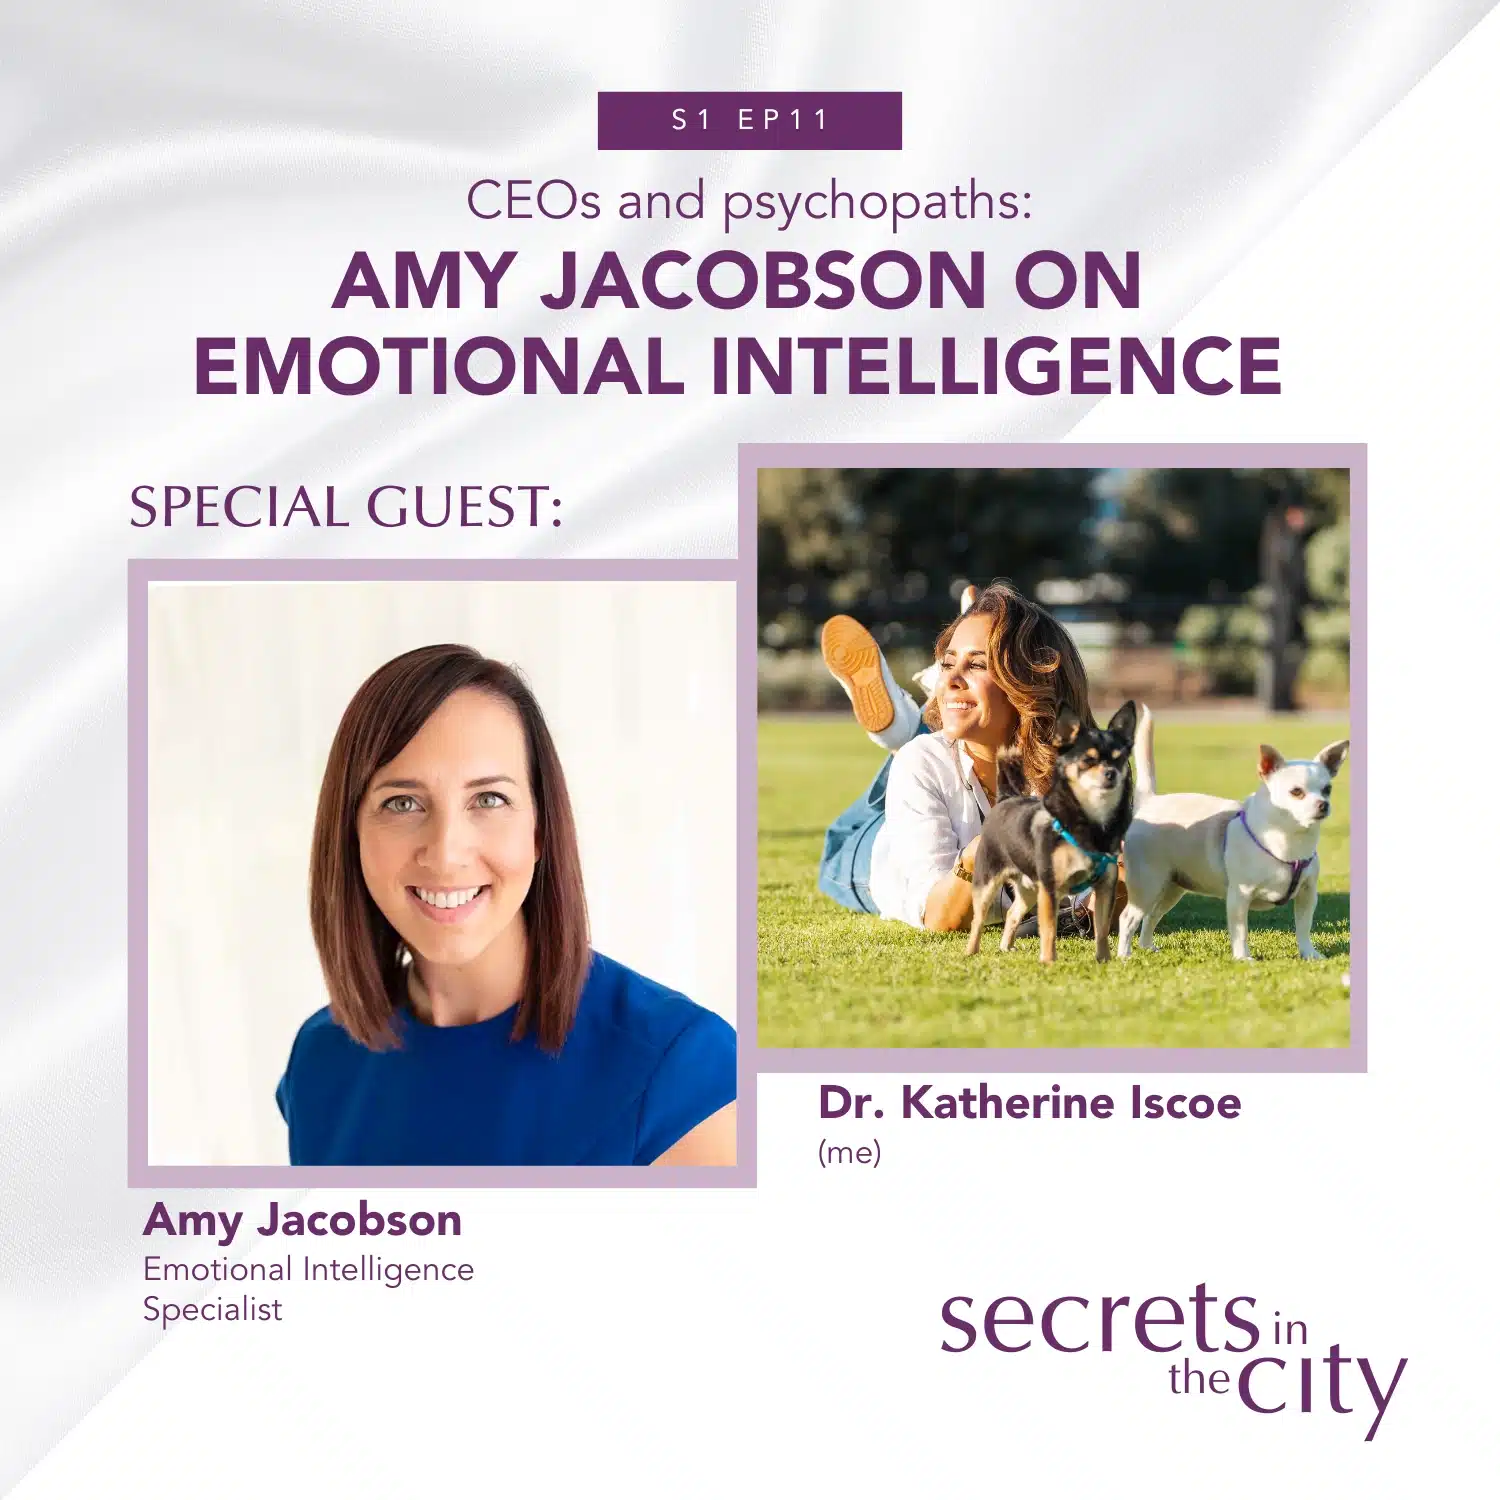 Live a healthier, happier life by learning how to build emotional intelligence with Amy Jacobson